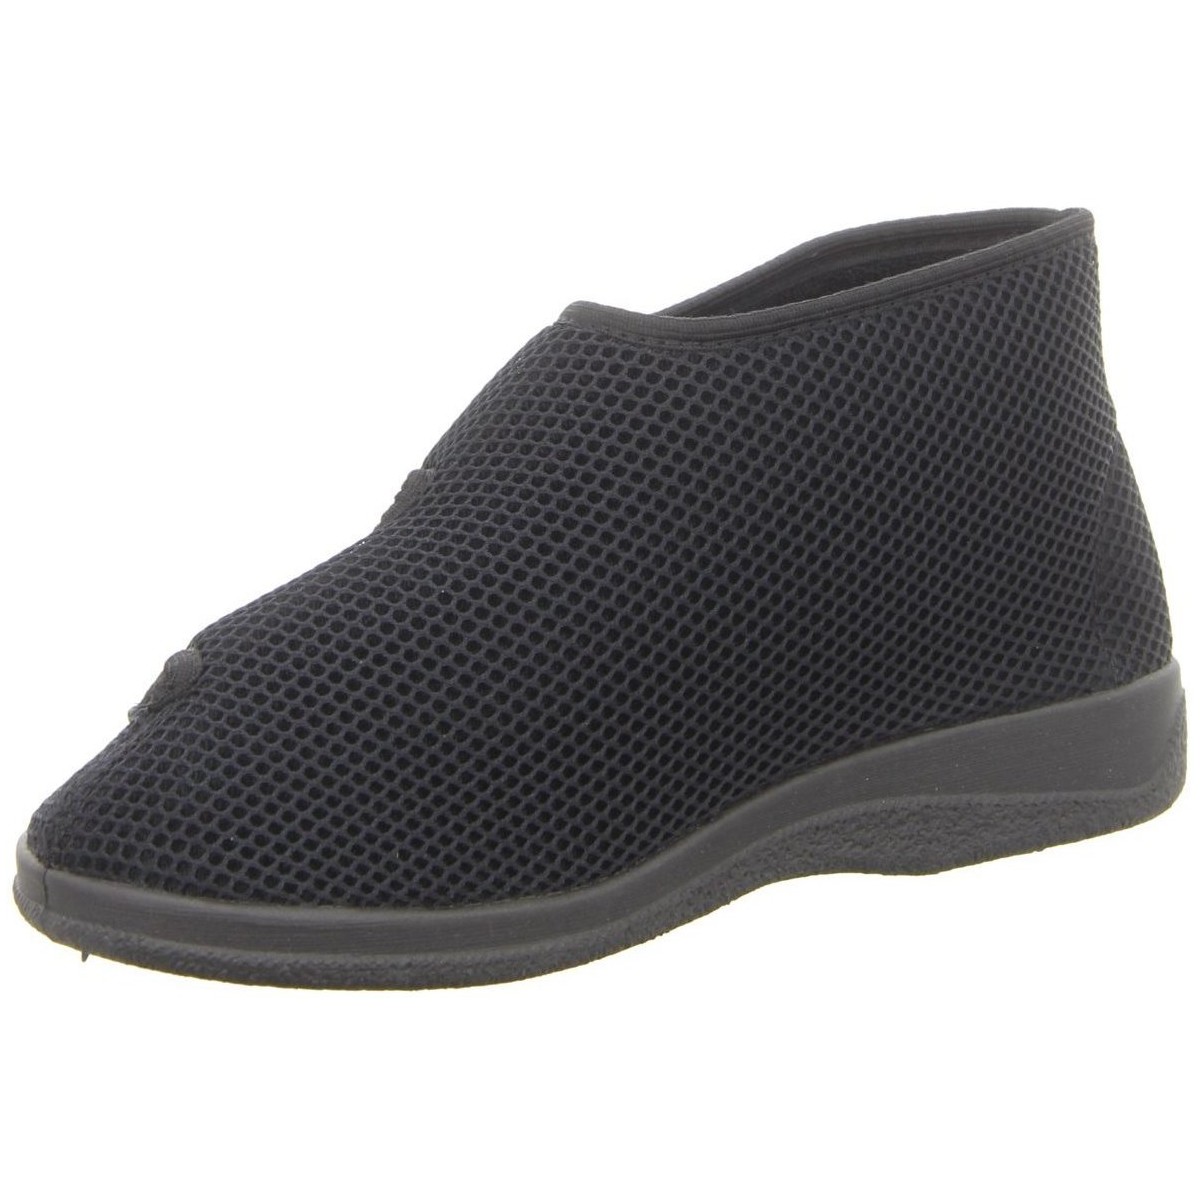 Chaussures Homme Chaussons Tofee  Noir